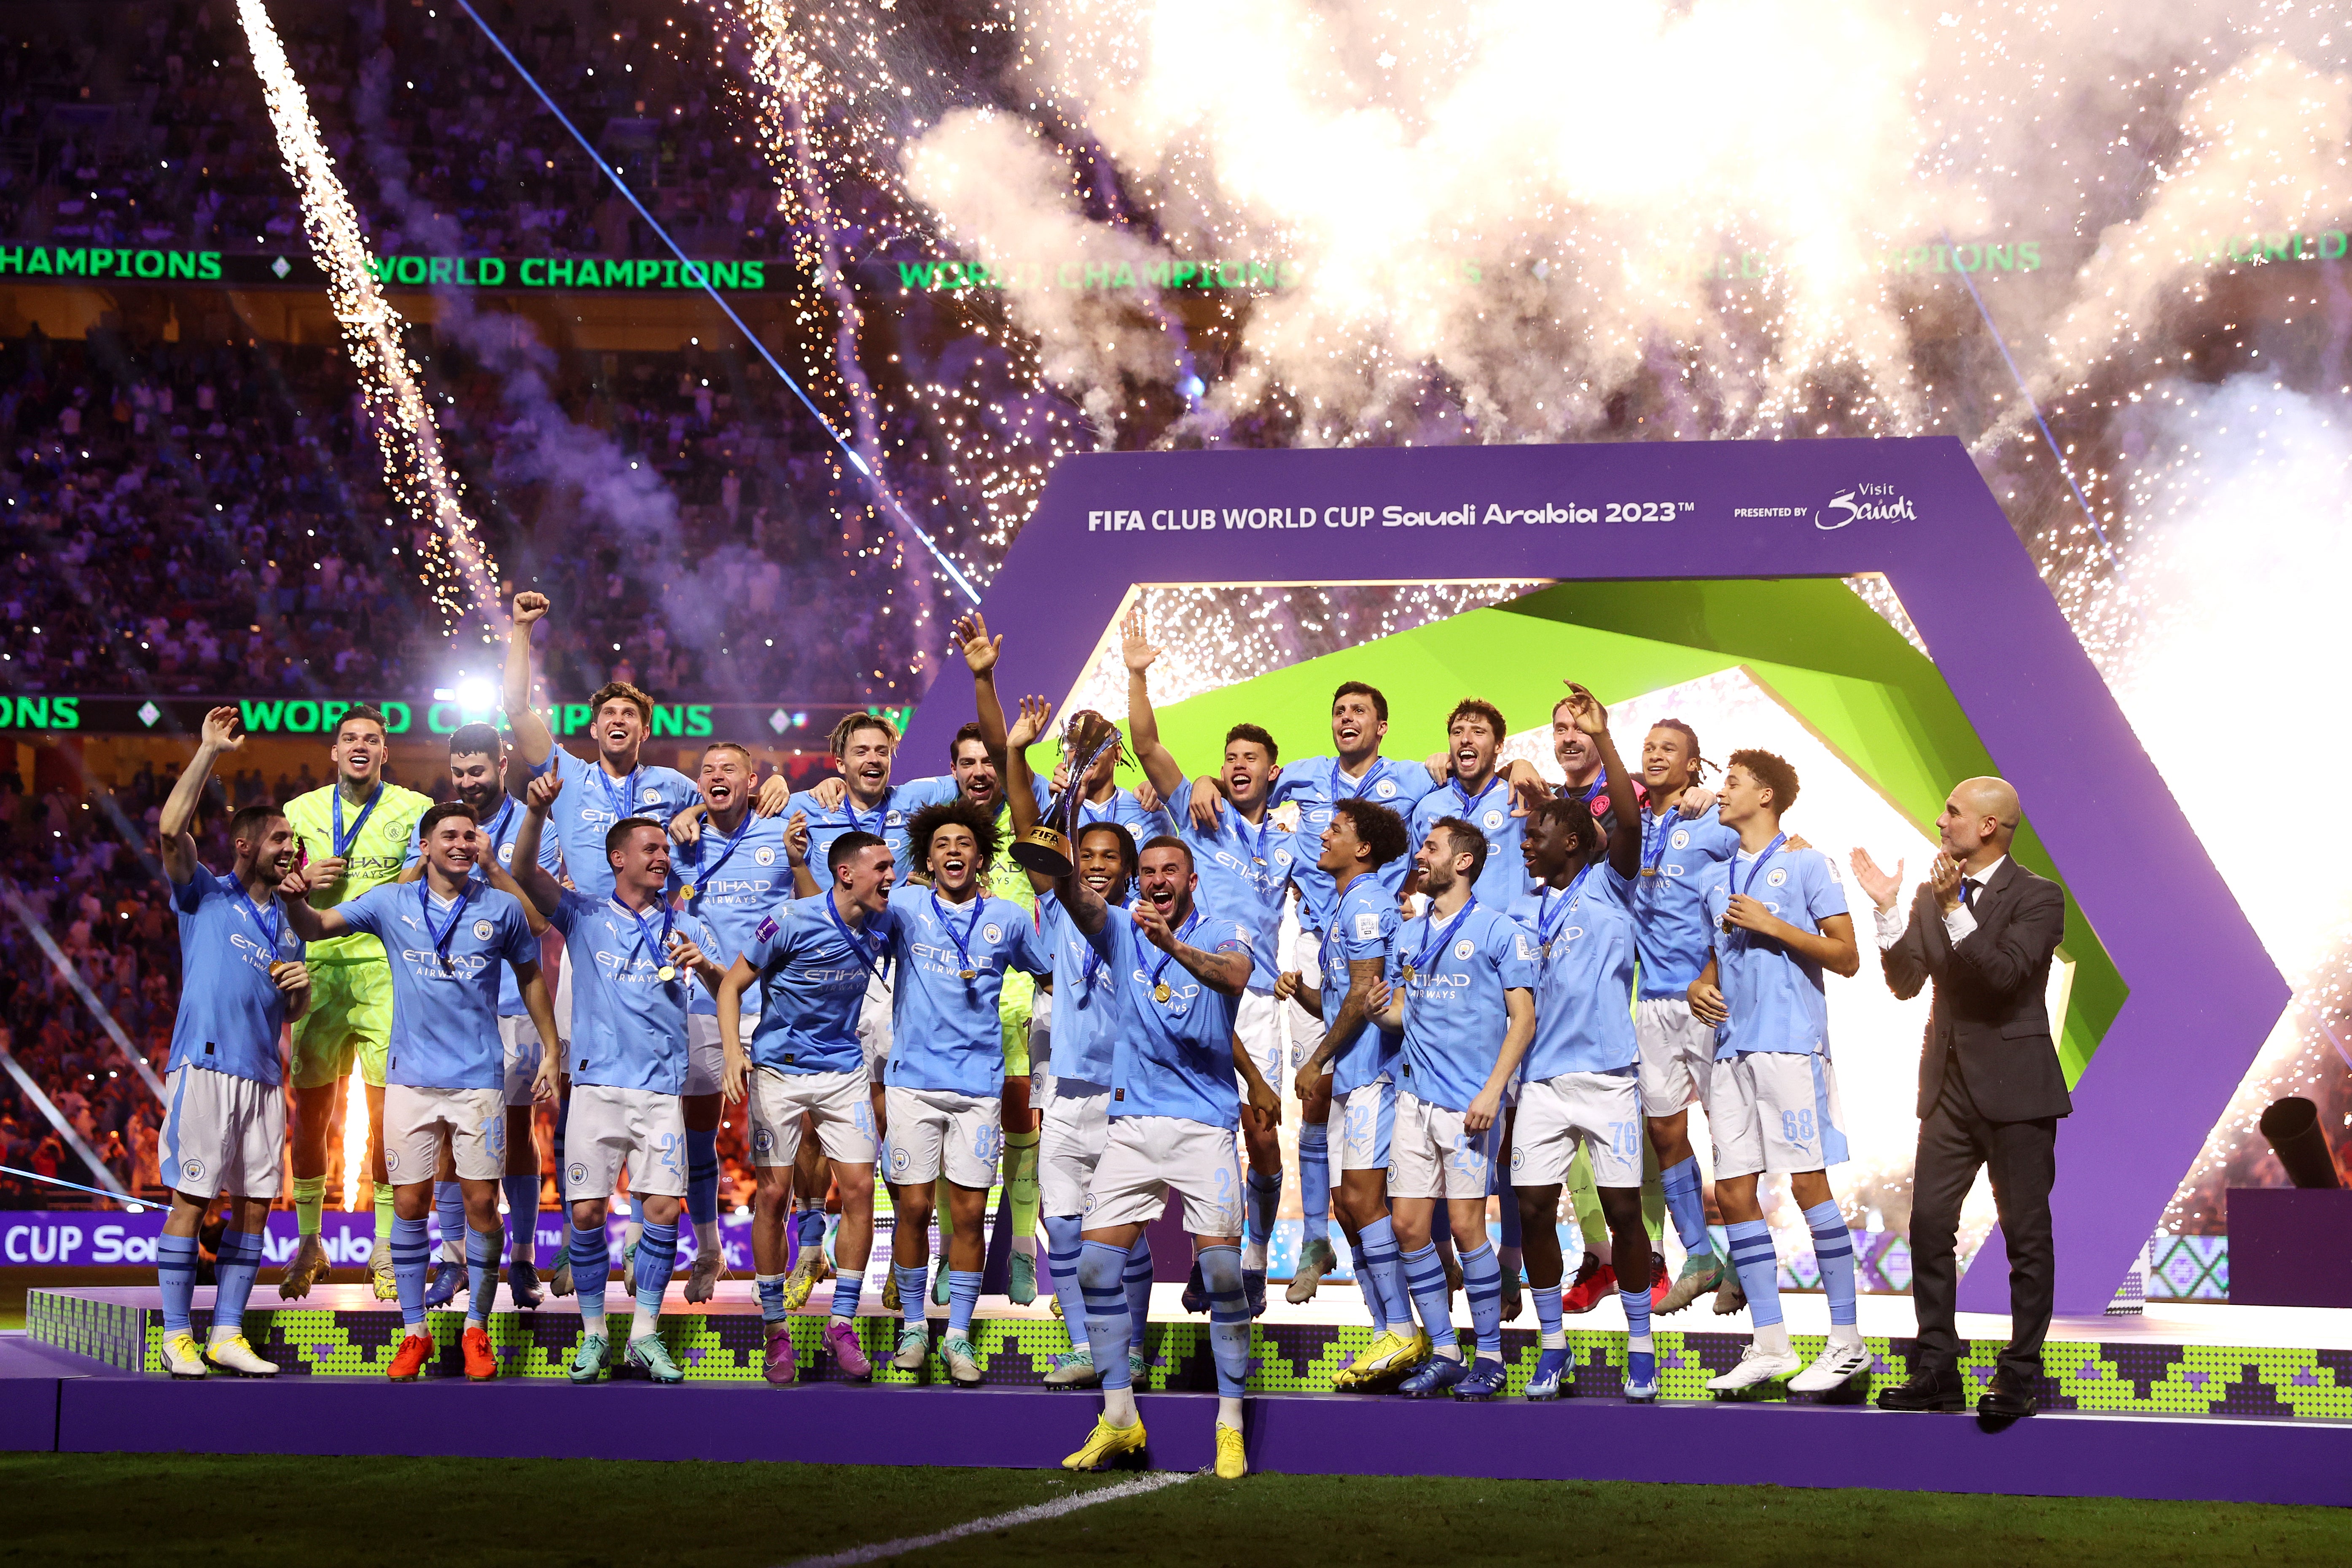 Manchester City are the current Fifa Club World Cup champions